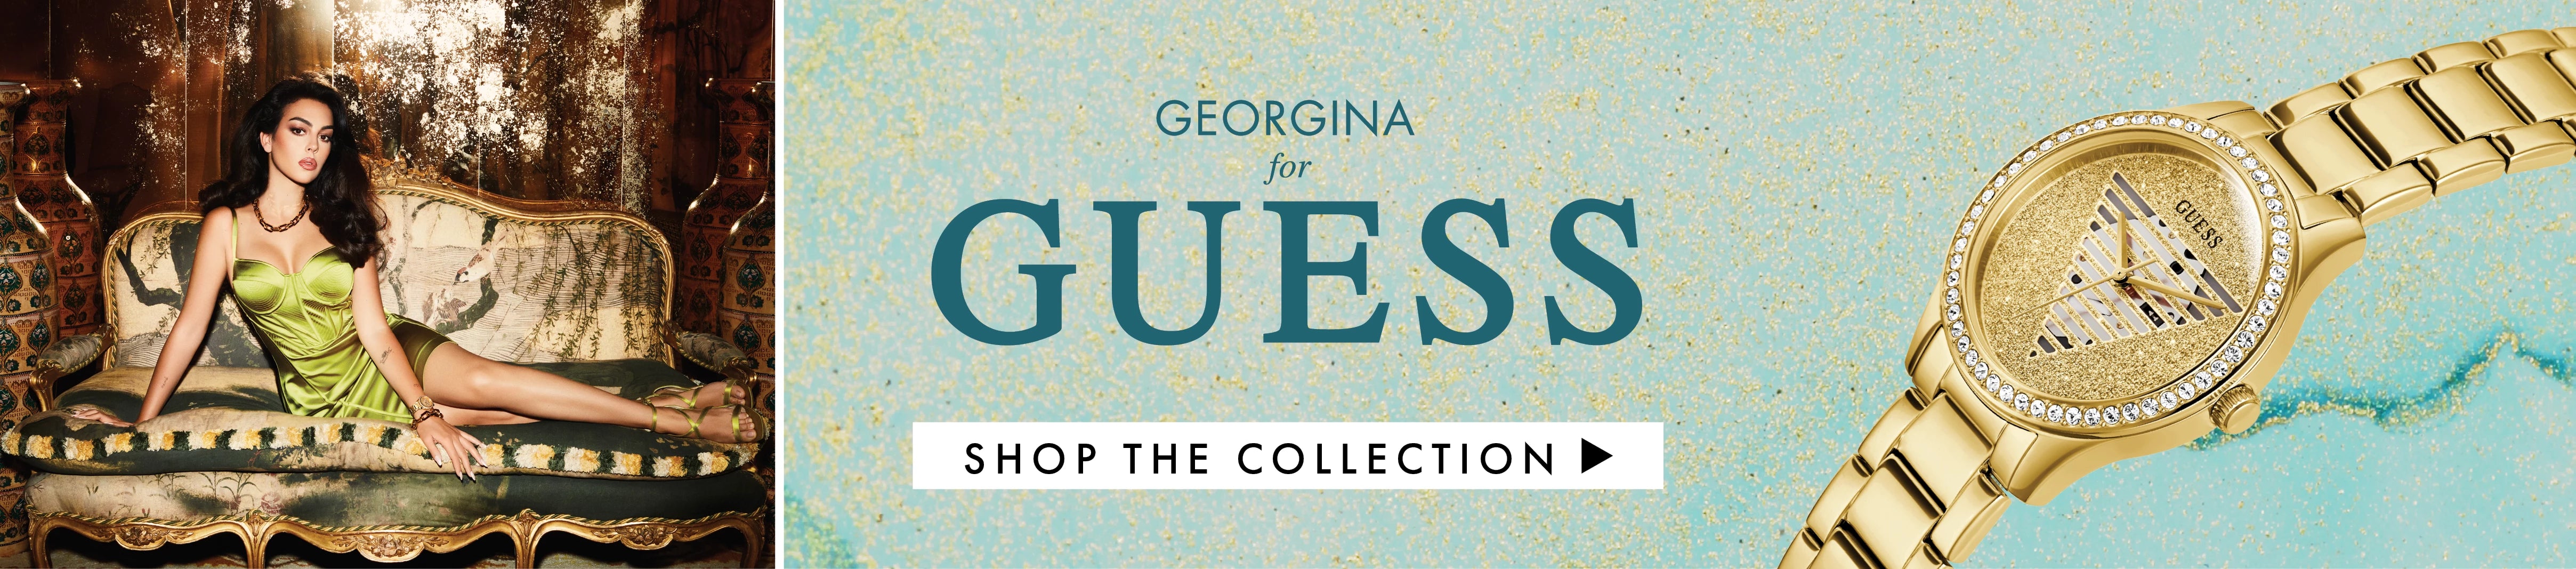 Guess Watches - Buy Online, Watch Shipping Free Depot 